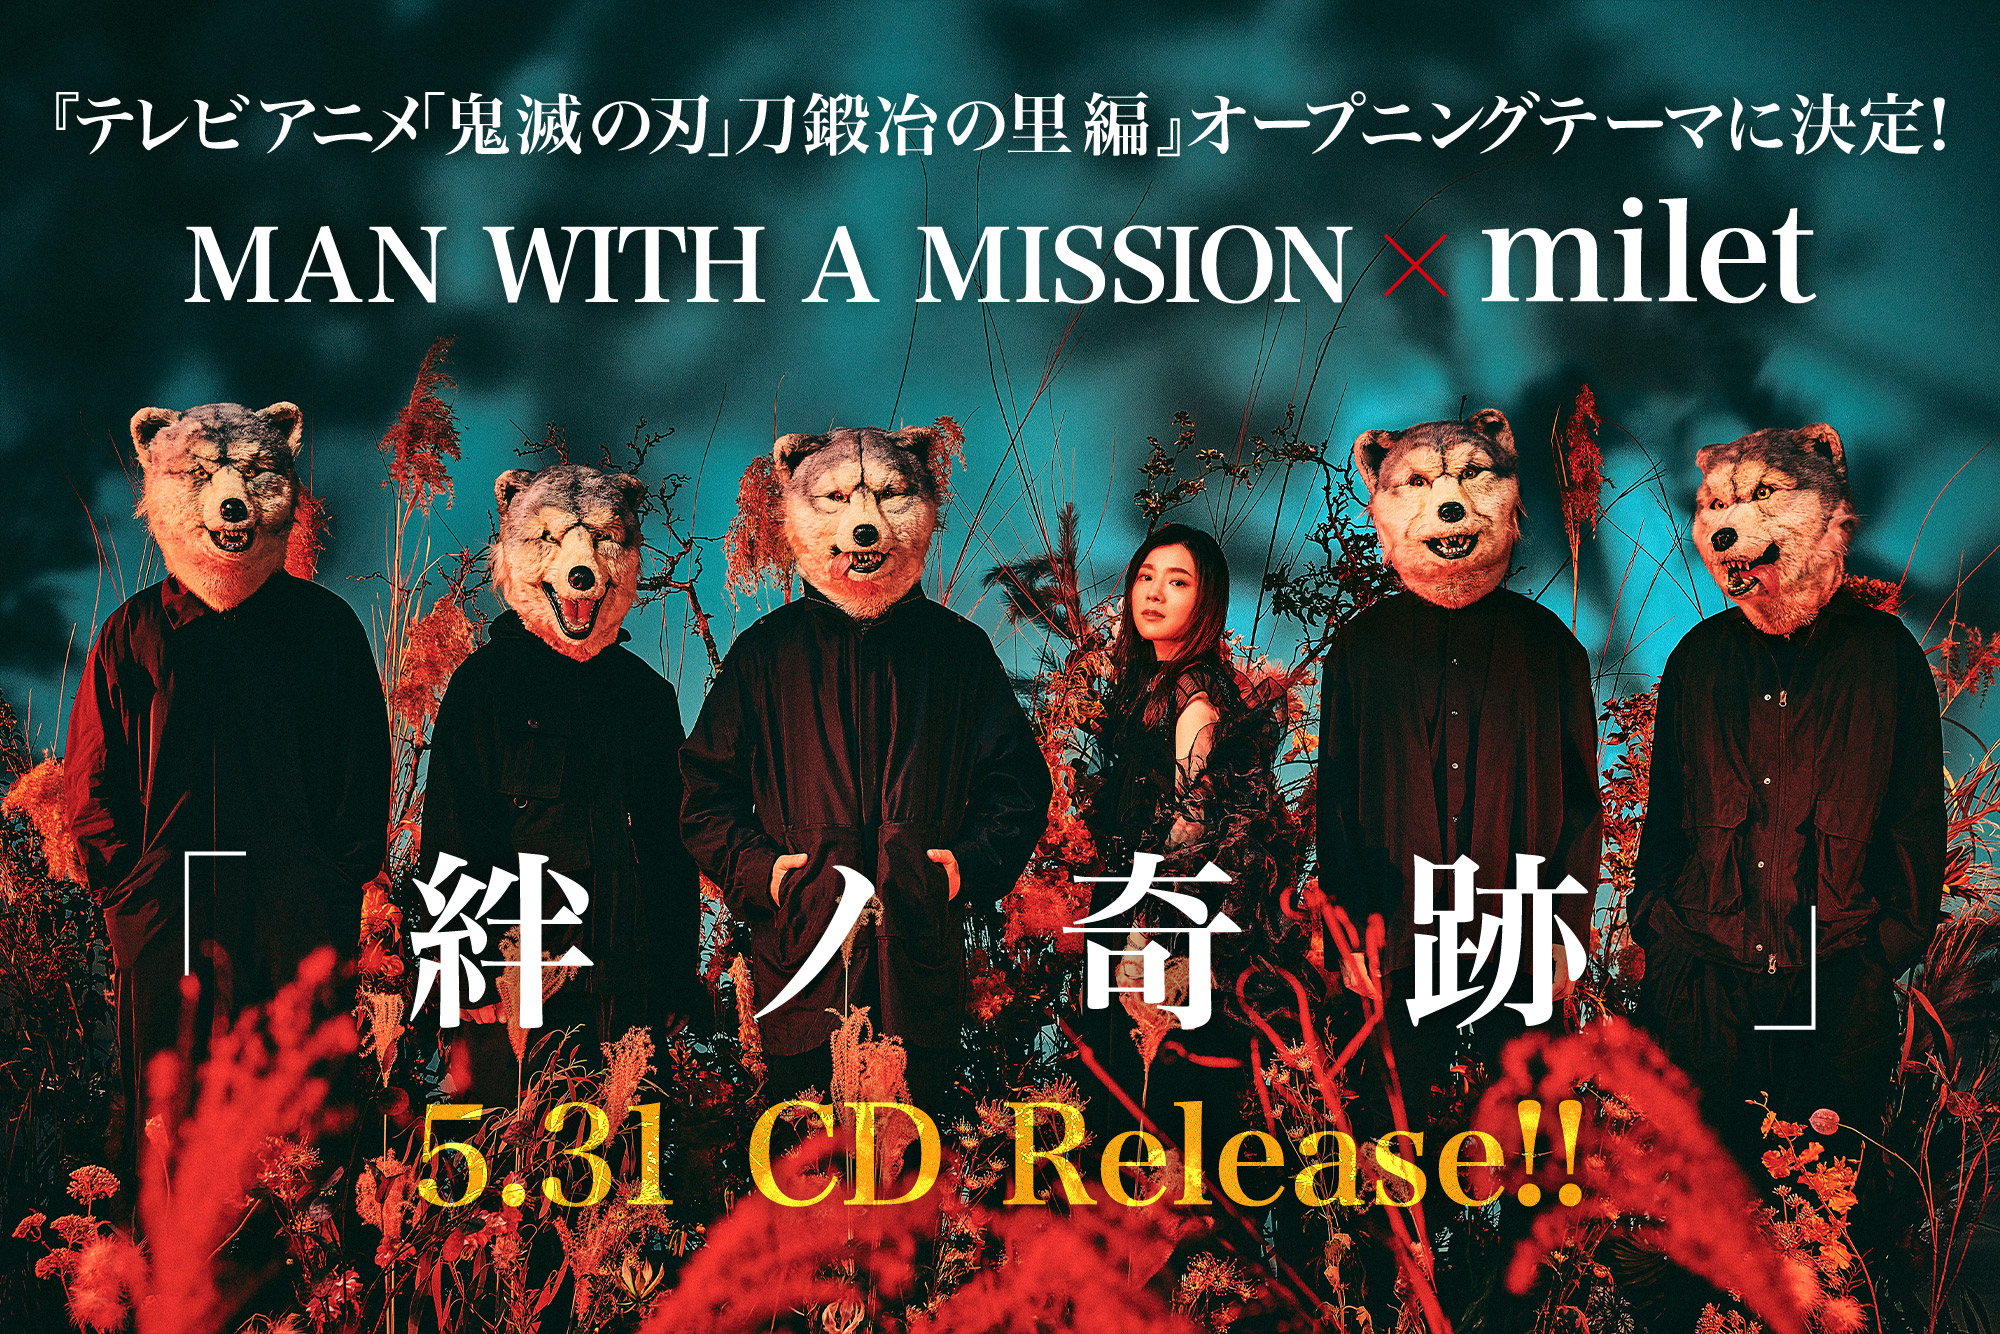 MAN WITH A MISSION×milet「絆ノ奇跡」『テレビアニメ「鬼滅の刃」刀鍛冶の里編』オープニングテーマに決定！5.31 CD Release!!